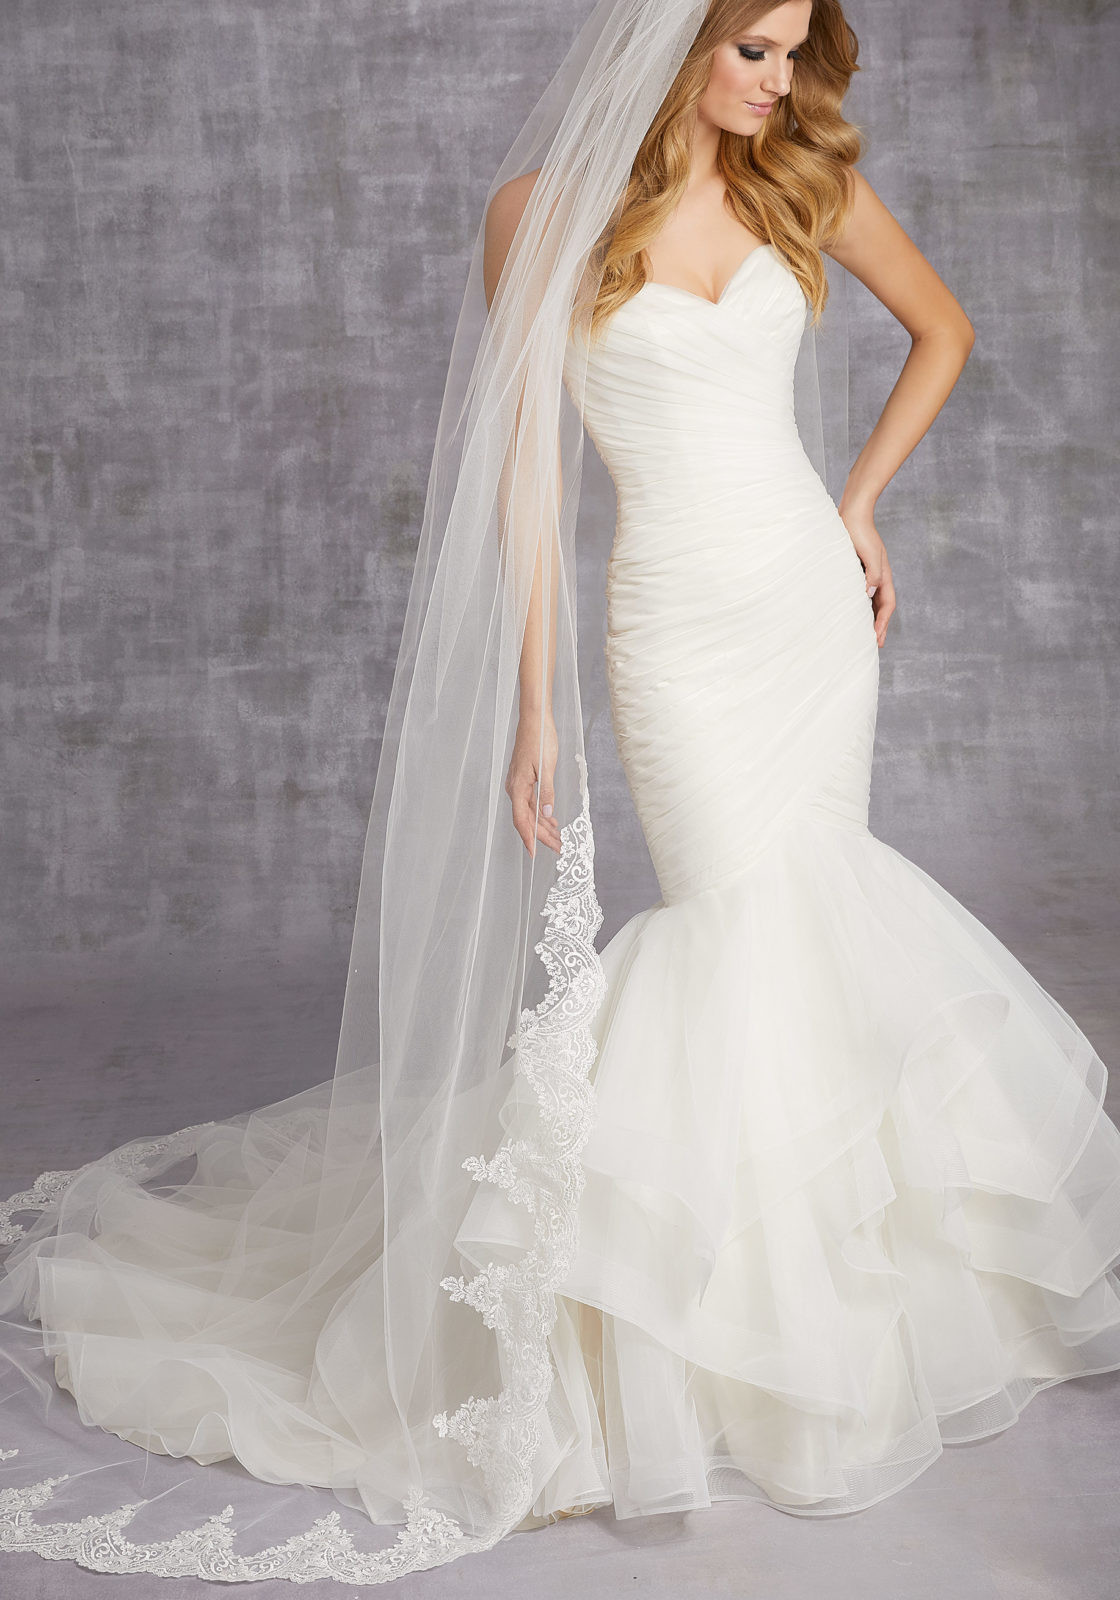 Wedding Dress With Veil
 Scalloped Lace Veil Beaded With Clear Sequins